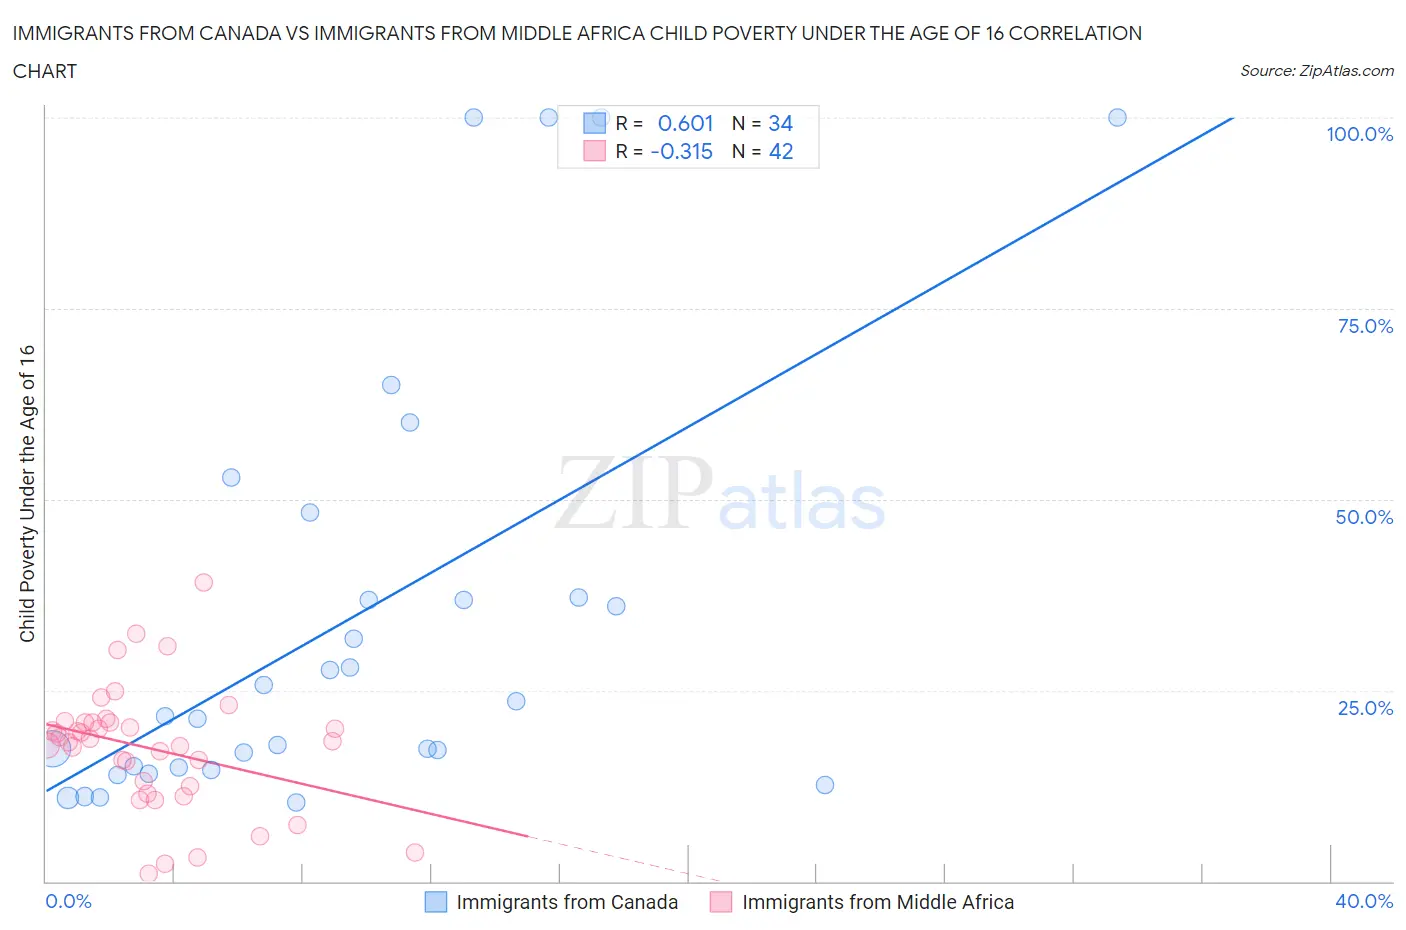 Immigrants from Canada vs Immigrants from Middle Africa Child Poverty Under the Age of 16